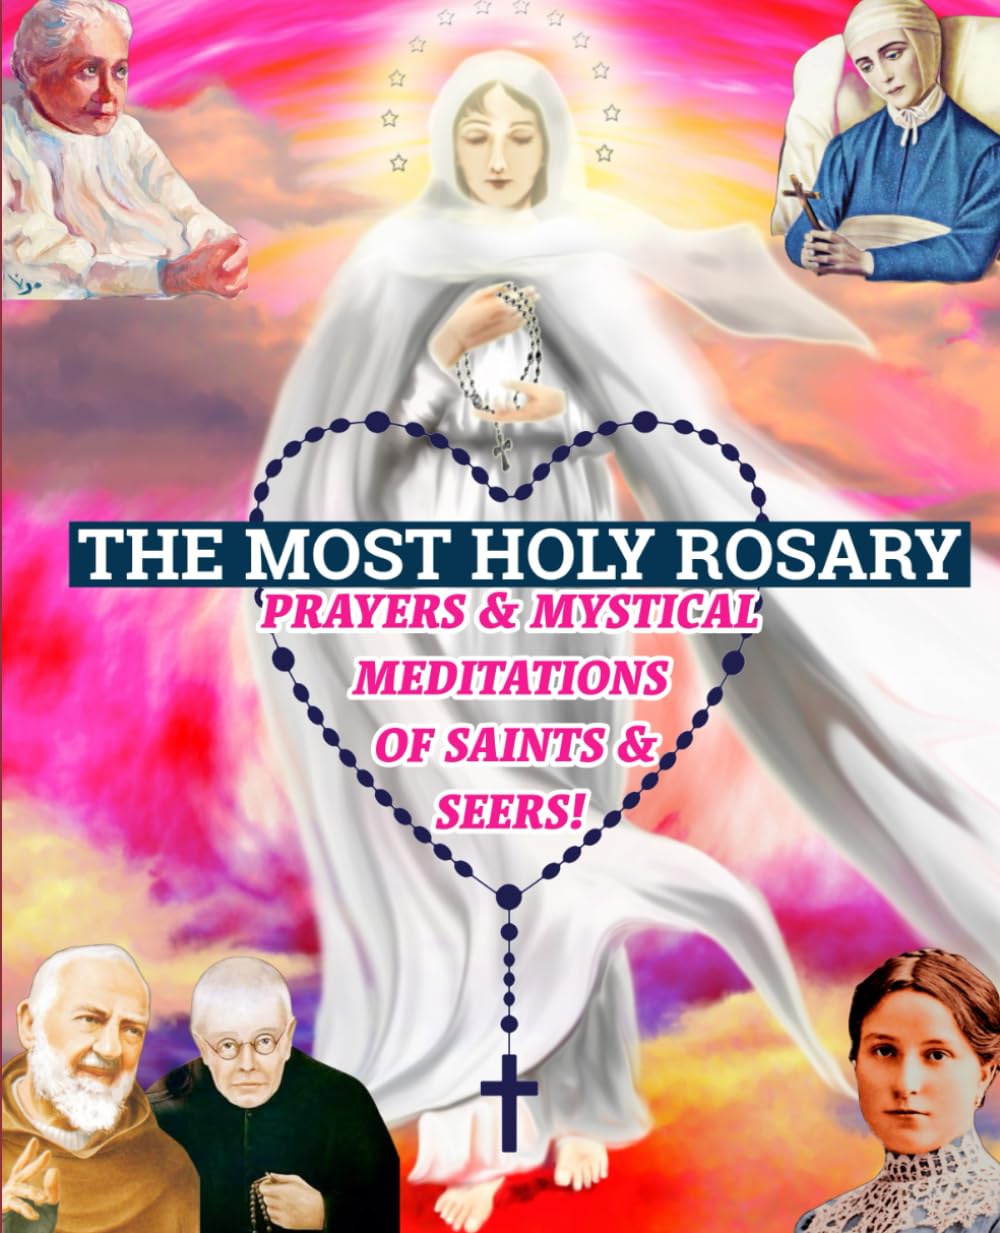 The Most Holy Rosary: Prayers and Mystical Meditations of Saints and Seers!